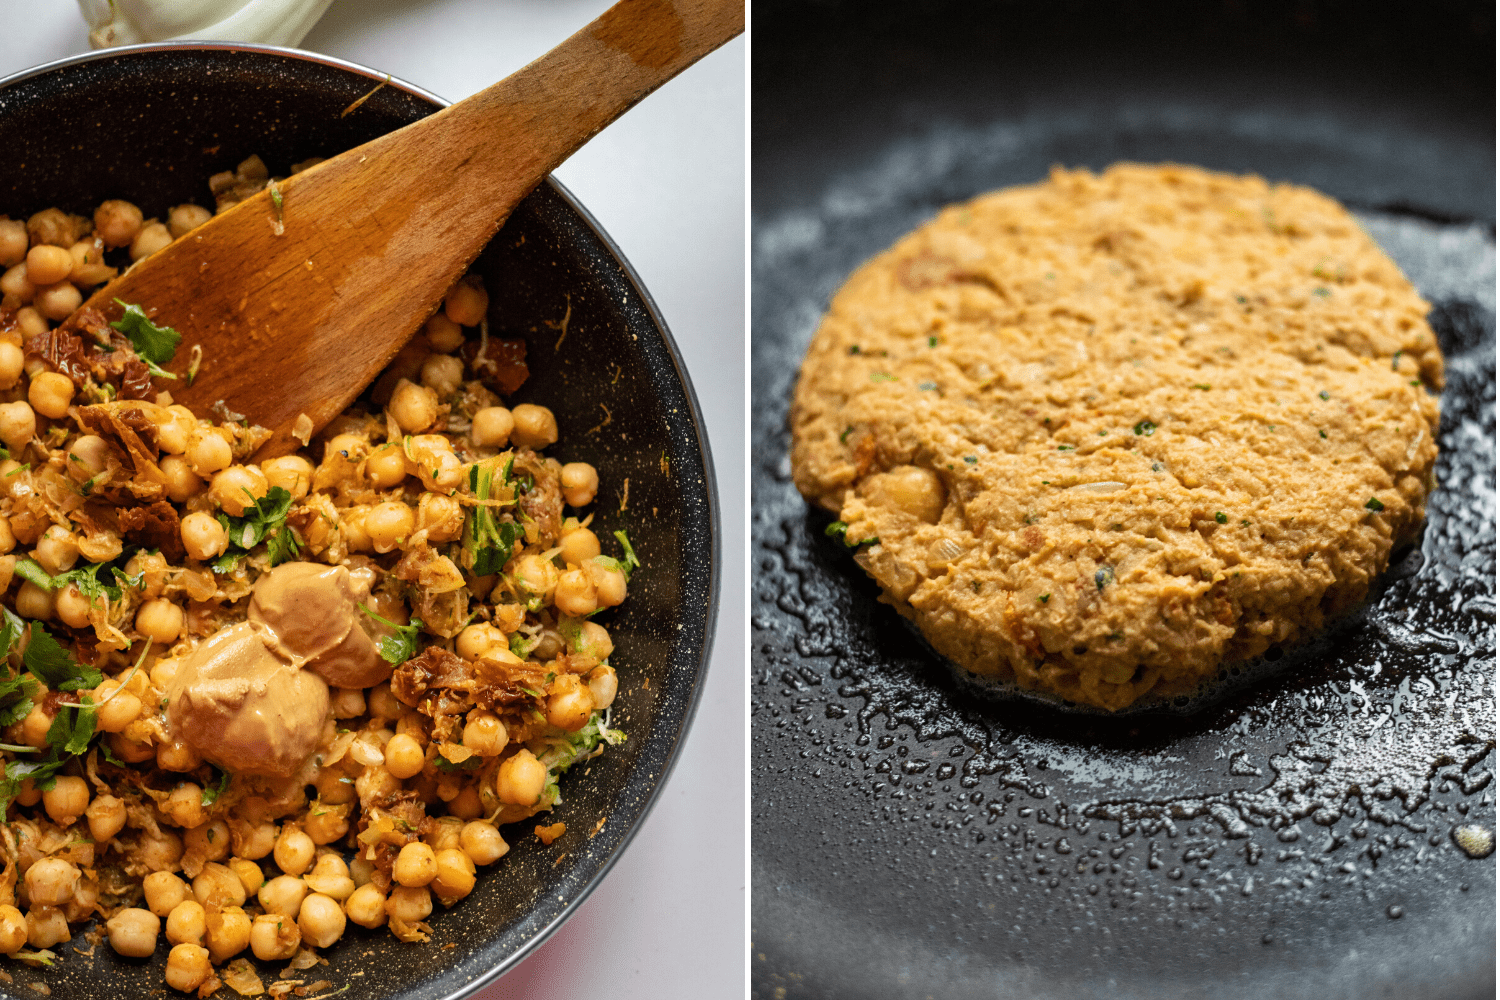 Process of preparing the chickpea pancakes